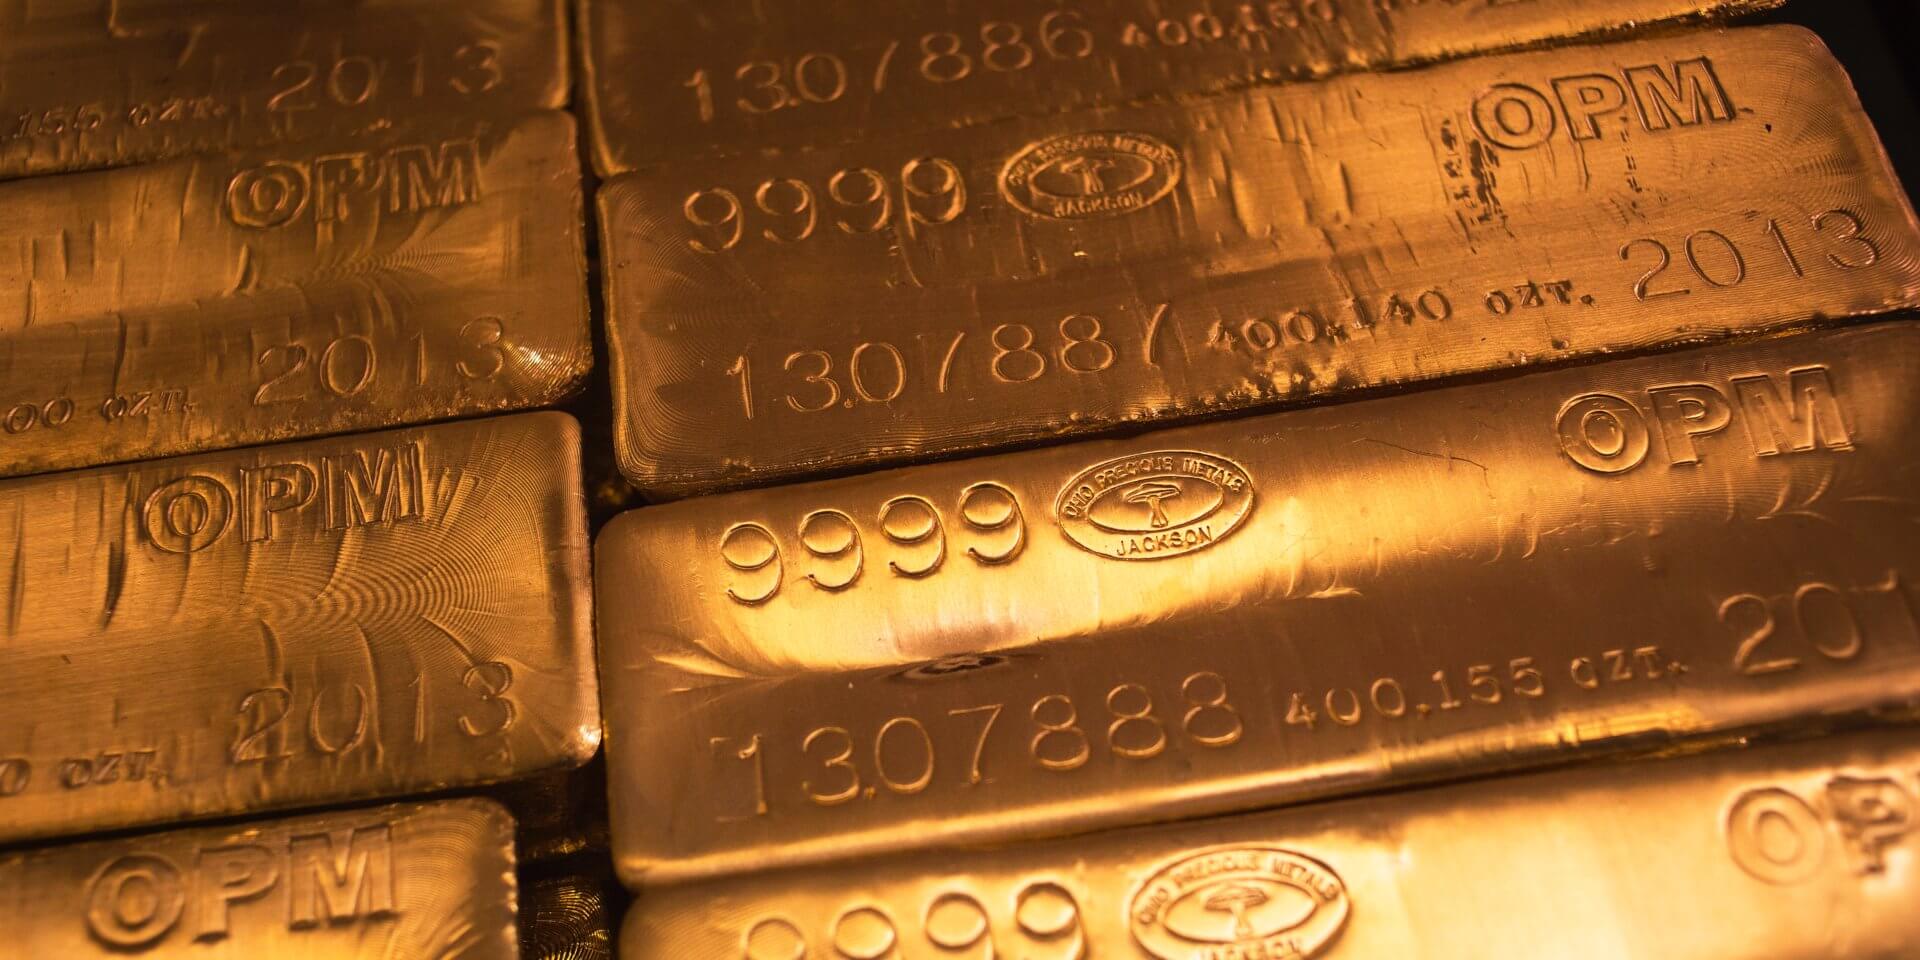 Venezuela & # 34; 15 tons of gold from the Bank of England - 1